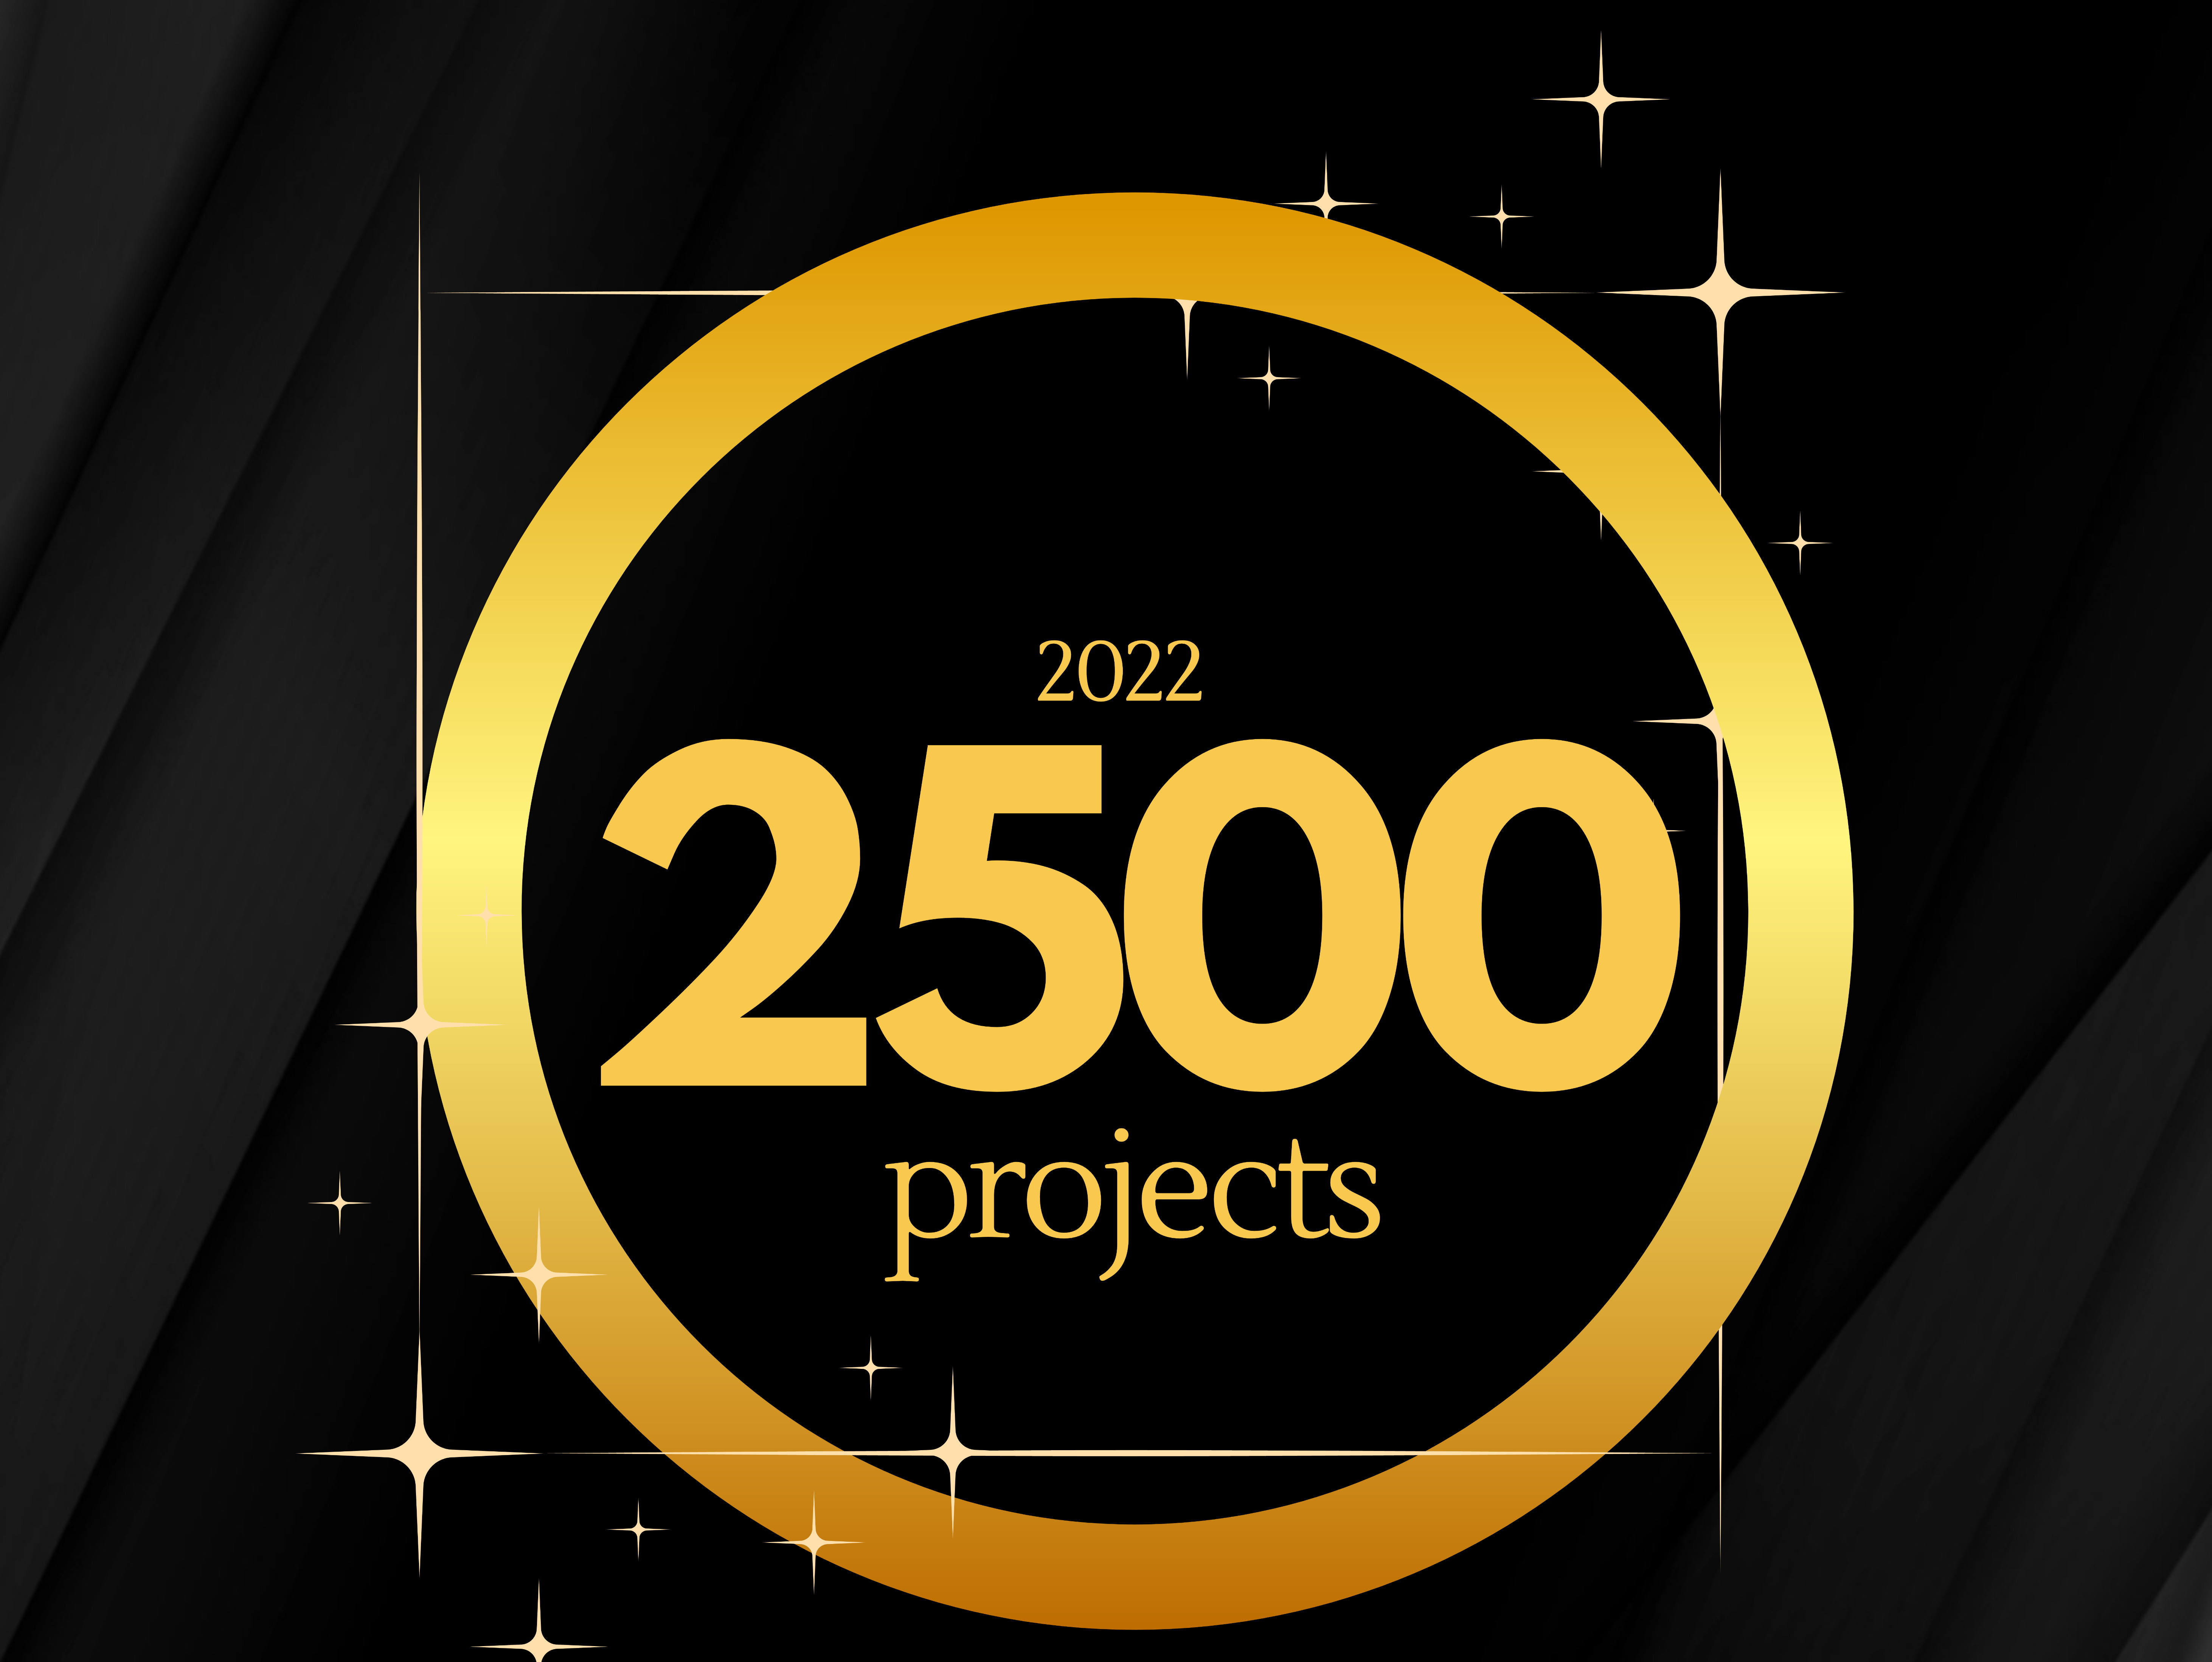 IP Parking has reached its 2500th project